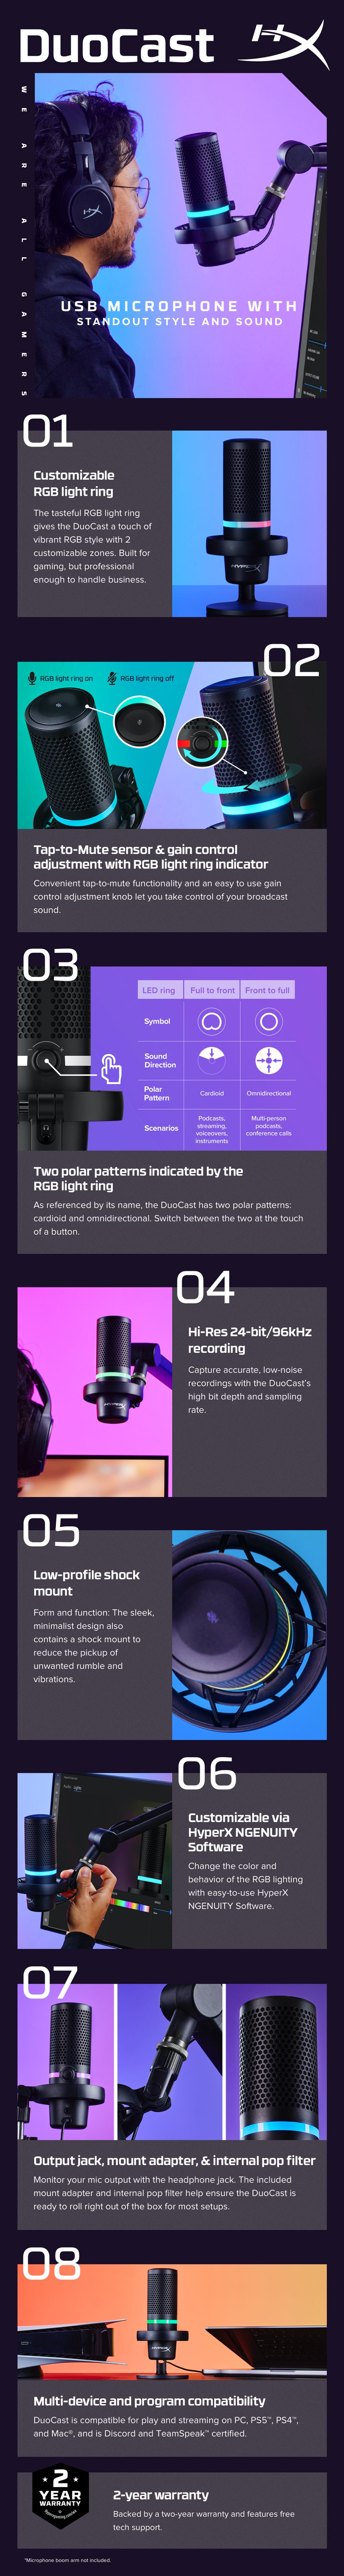 A large marketing image providing additional information about the product HyperX DuoCast - RGB Condenser Microphone - Additional alt info not provided